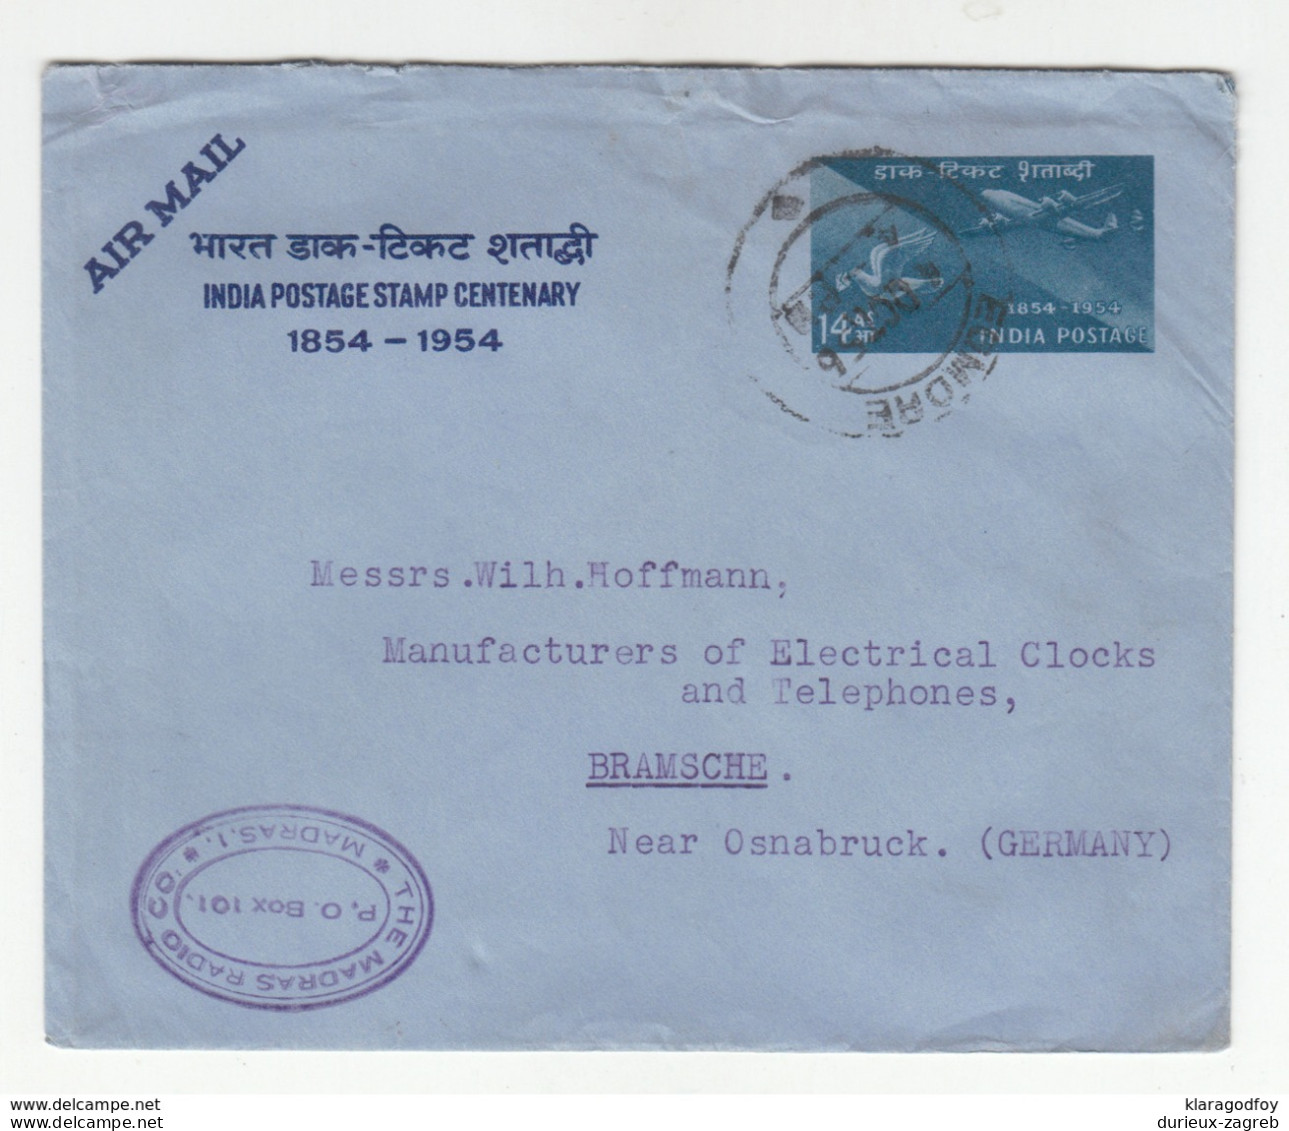 India Postage Stamp Centenary Aerogramme Travelled 1956 Zo Germany B190922 - Airmail